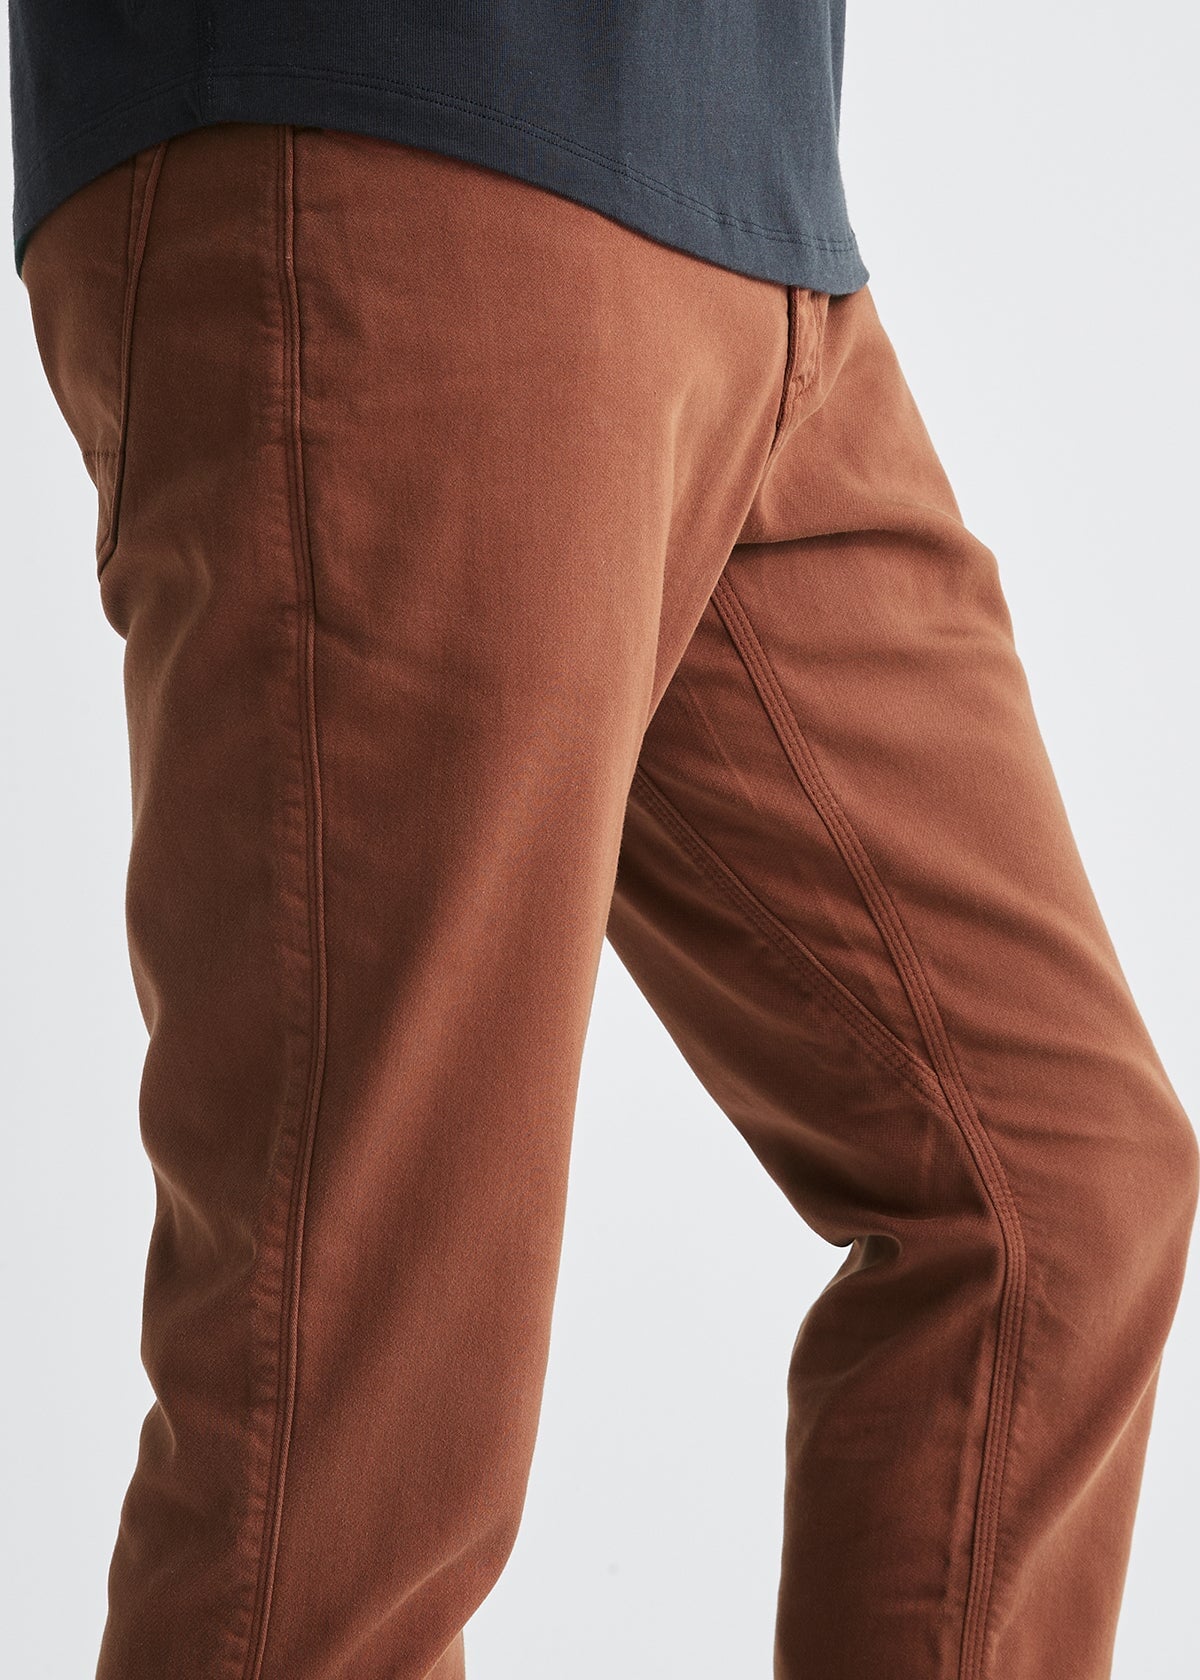 mens red-brown relaxed fit dress sweatpant gusset detail